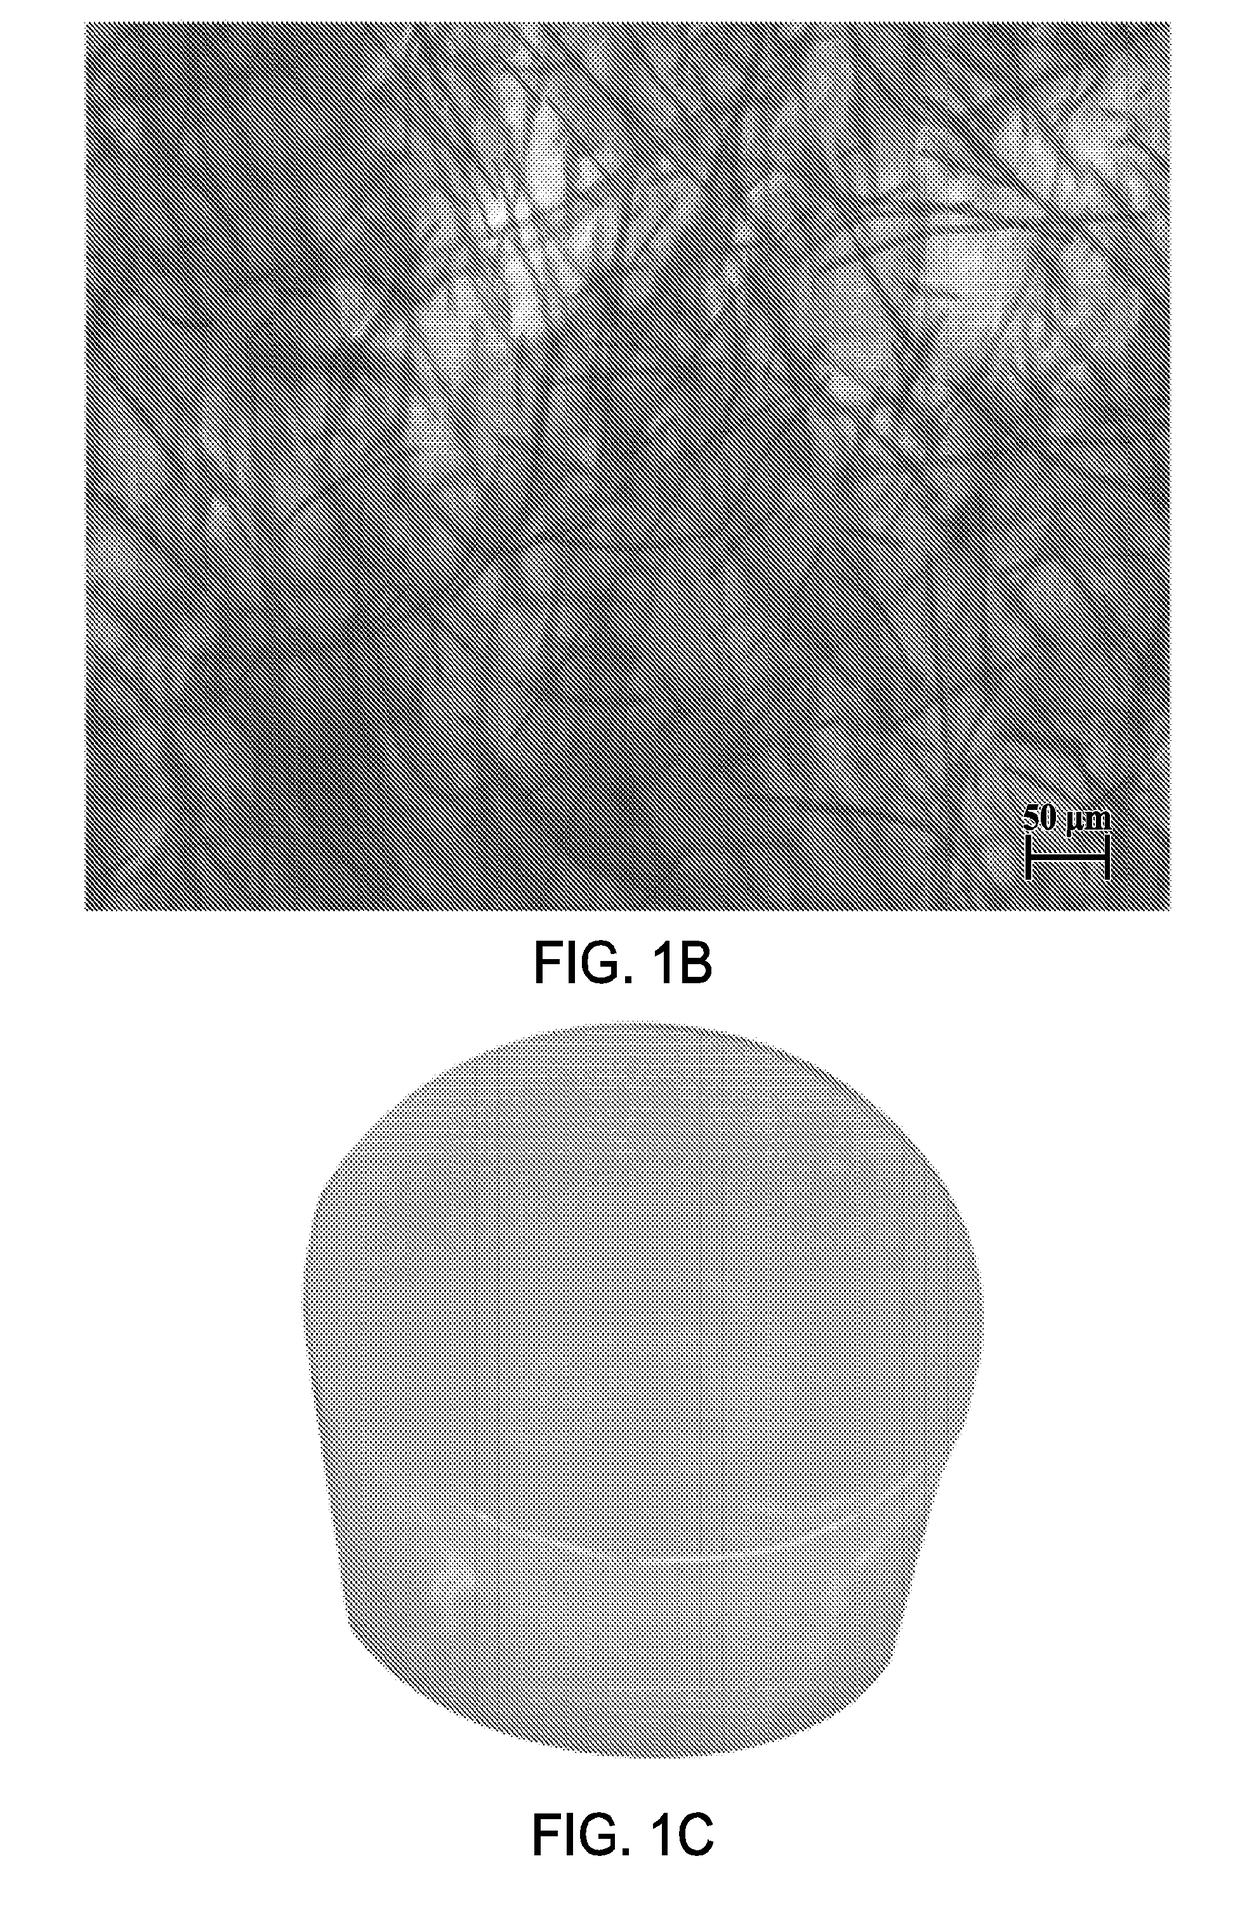 Fiber-hydrogel composite surgical meshes for tissue repair